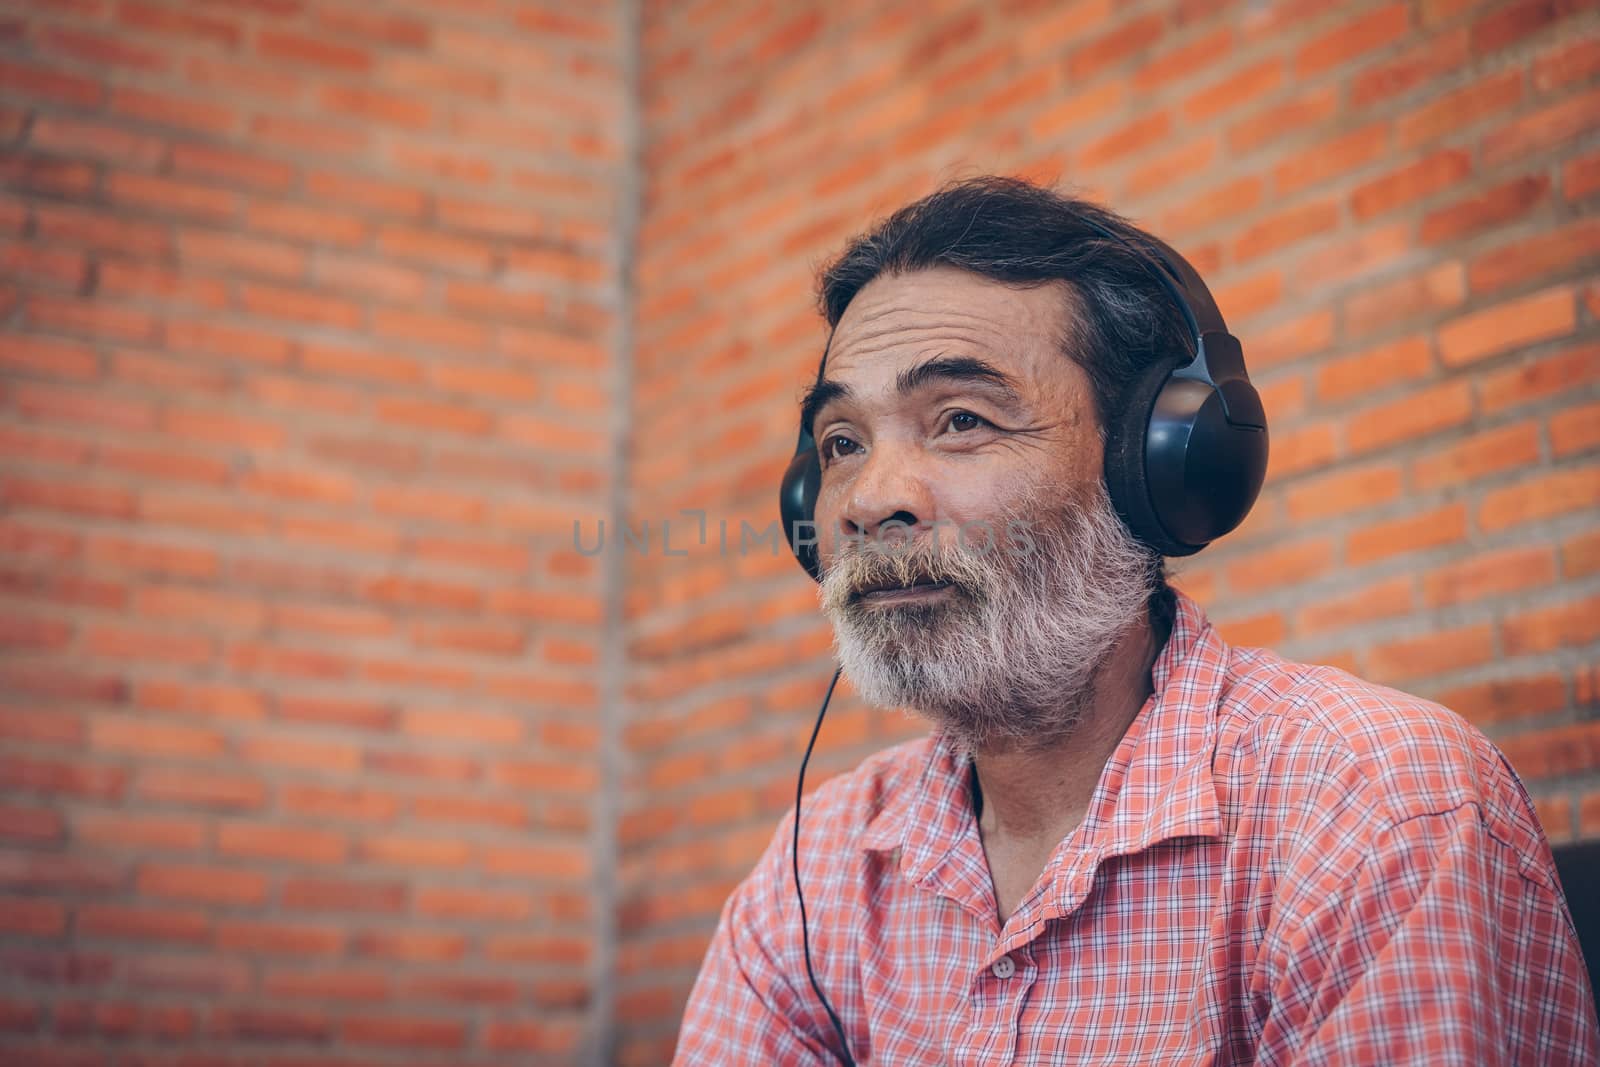 The old man listens to the music from the headphones,Enjoying the rich sound of the music.